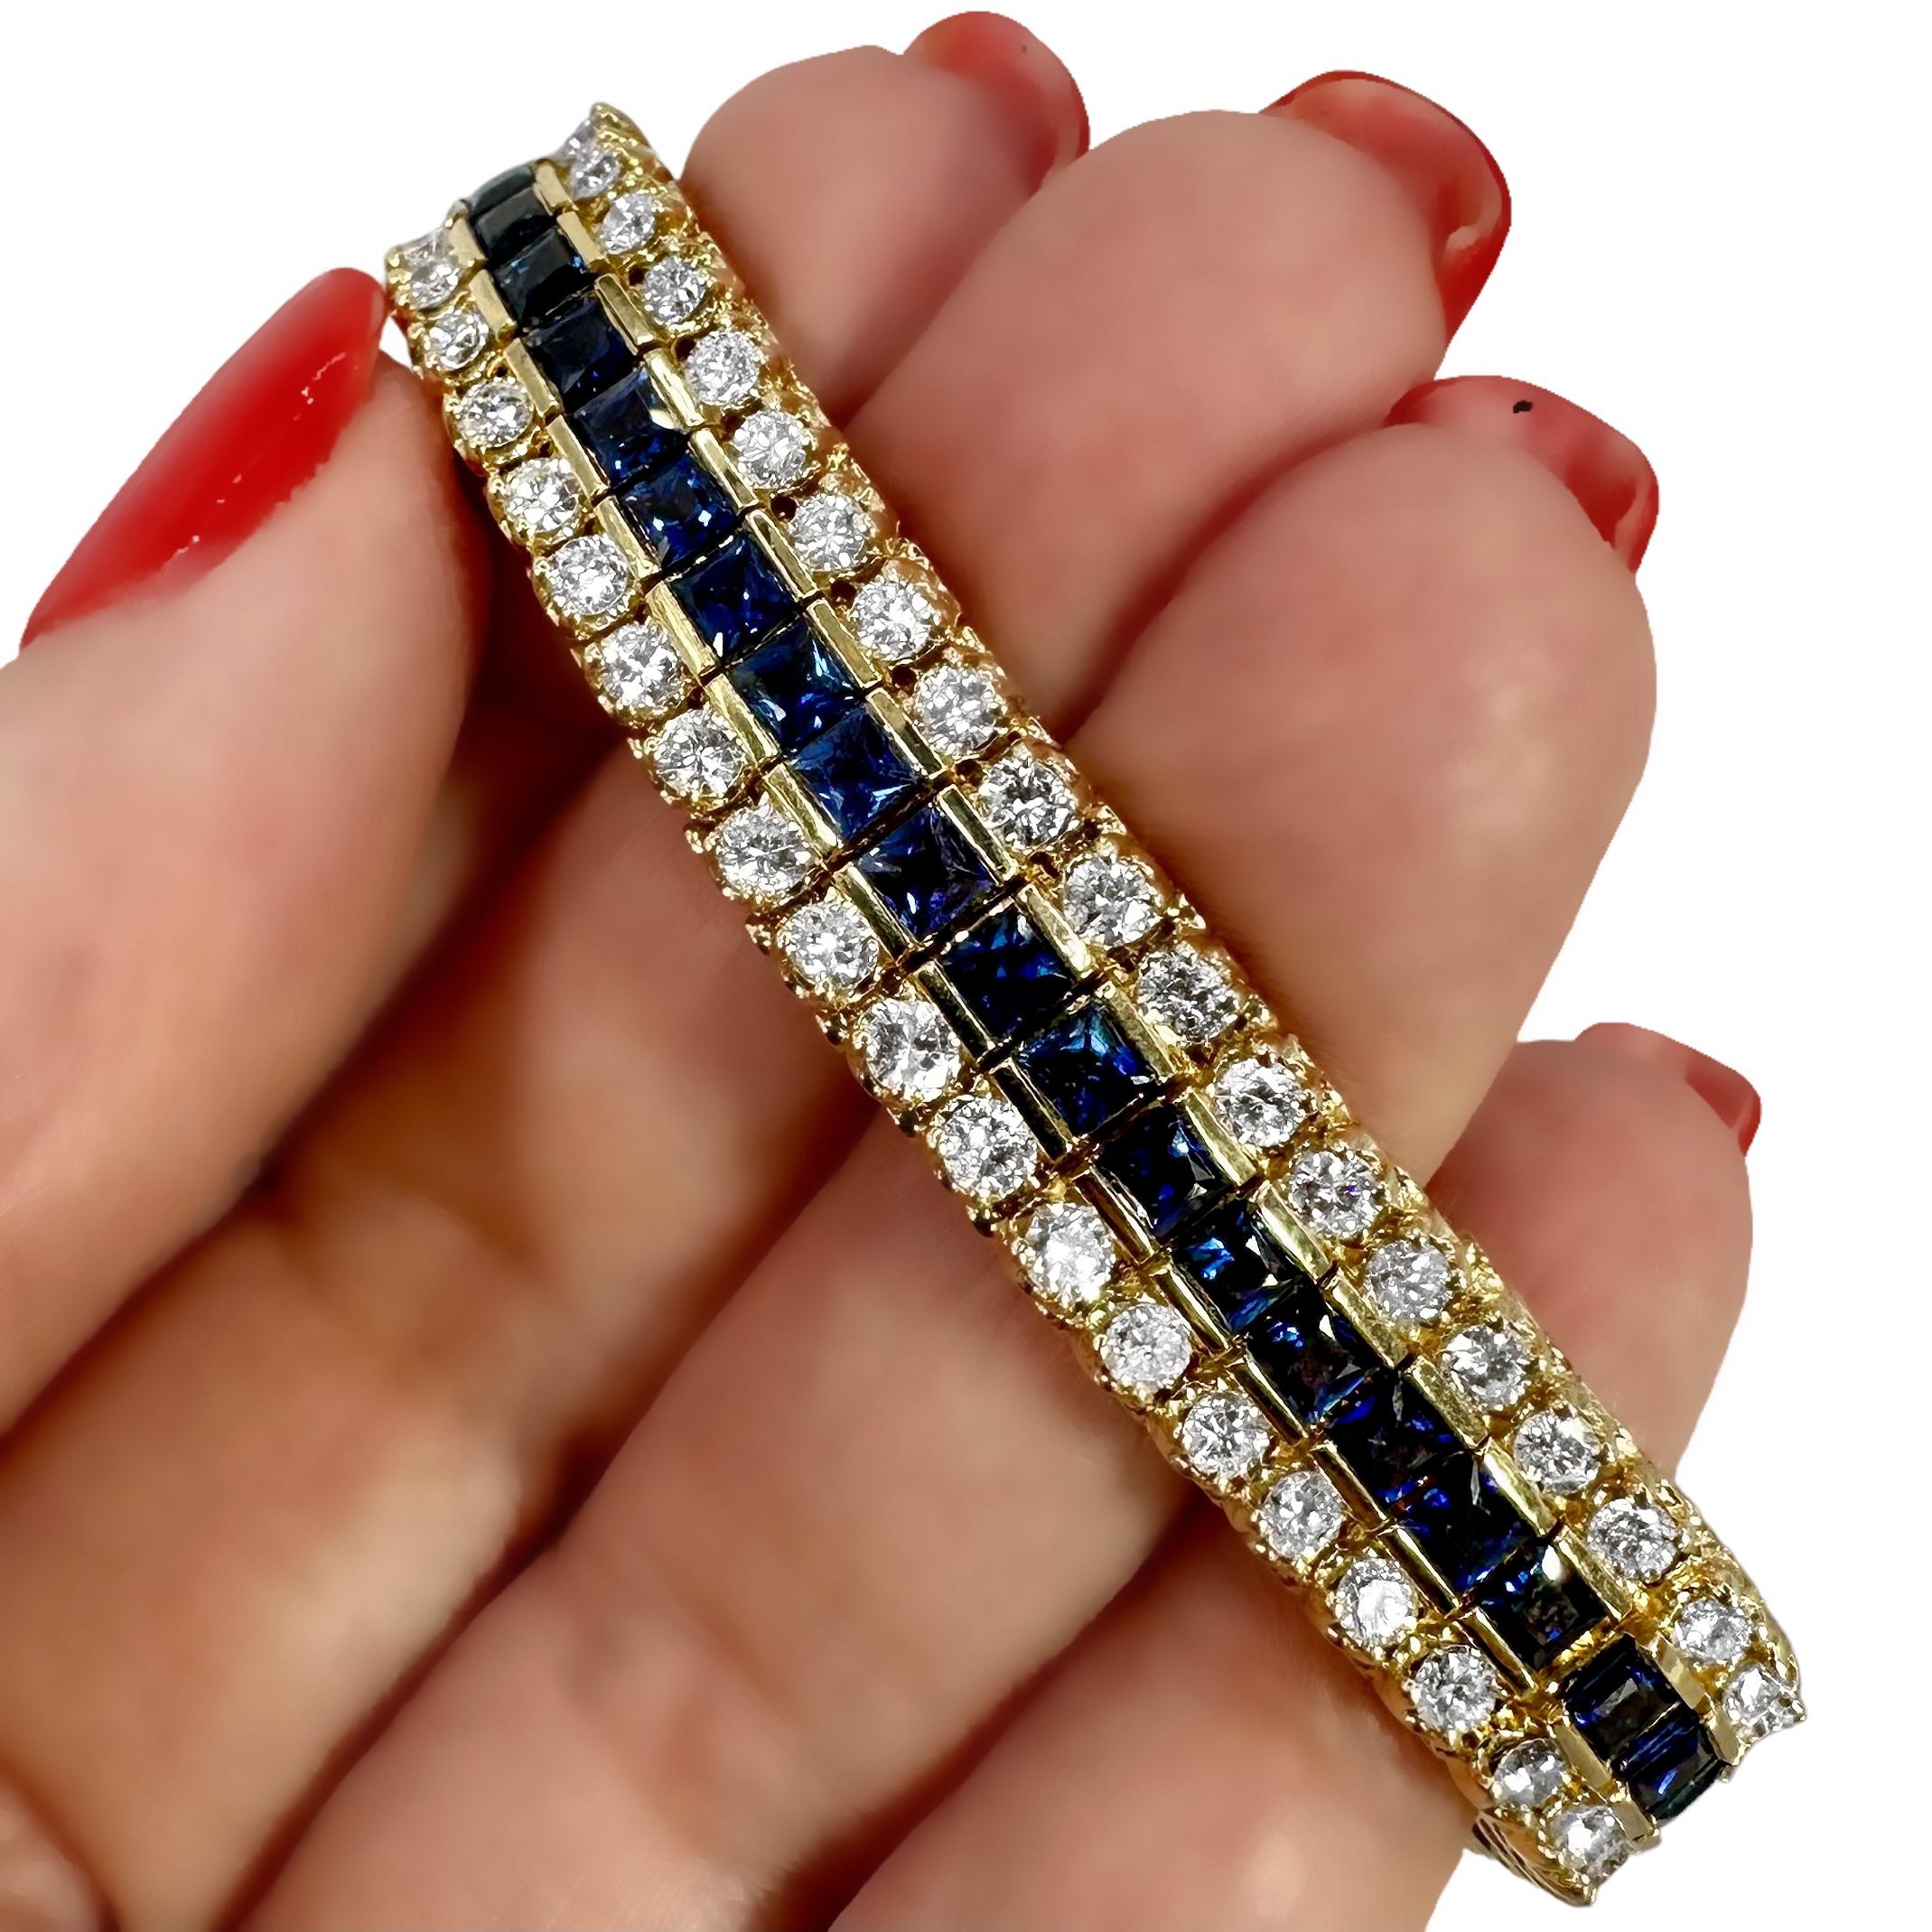 3 Row Gold Tennis Bracelet With 2 Diamond Rows Surrounding 1 Row of Sapphires For Sale 2